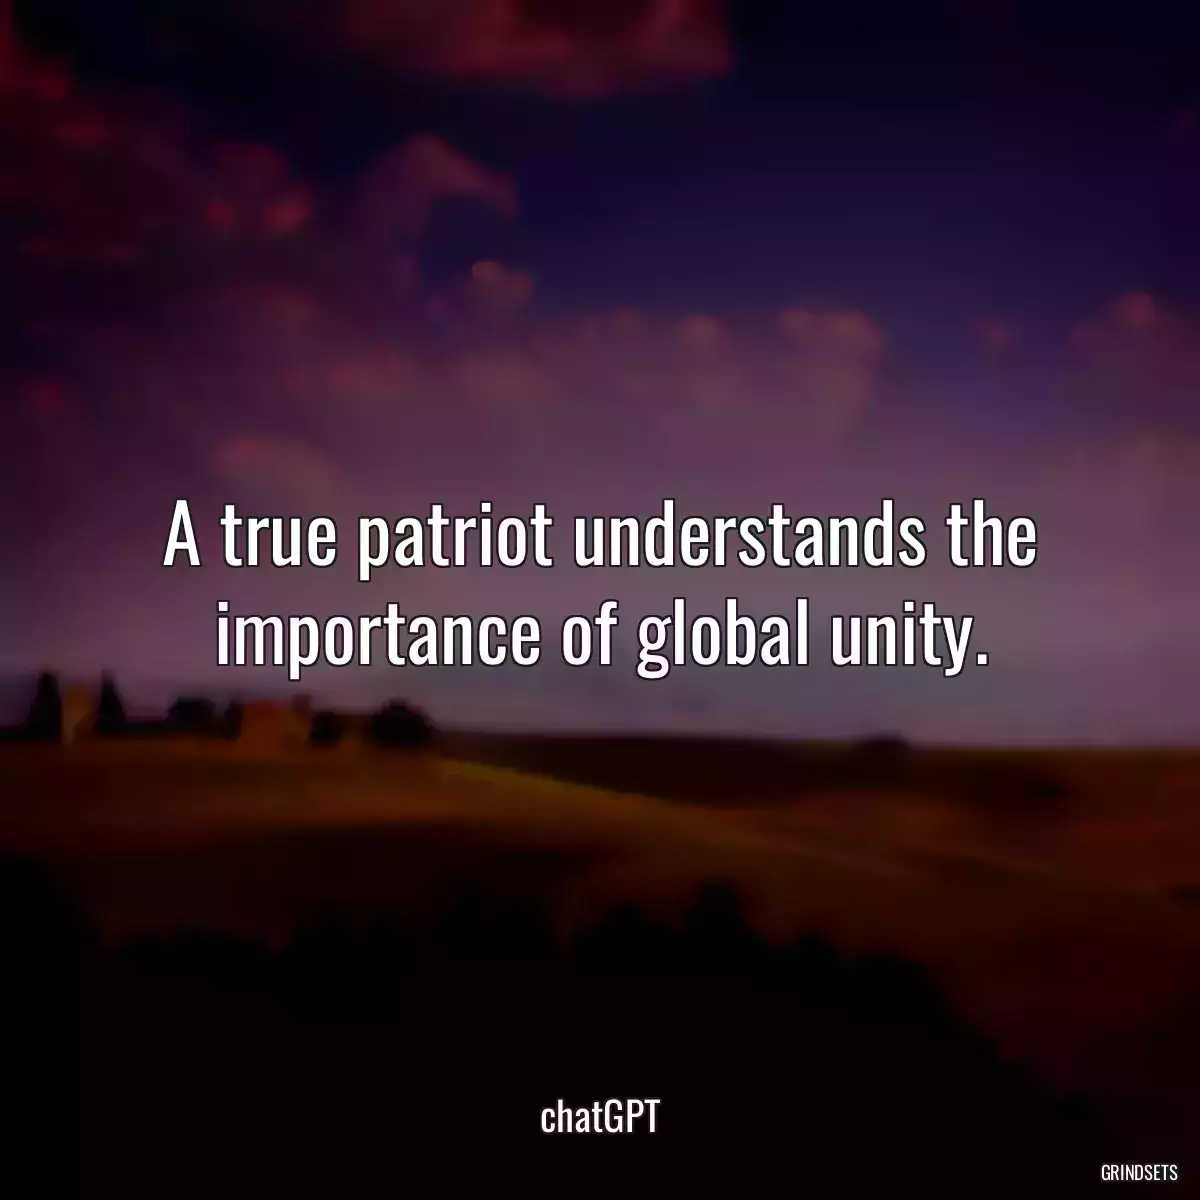 A true patriot understands the importance of global unity.